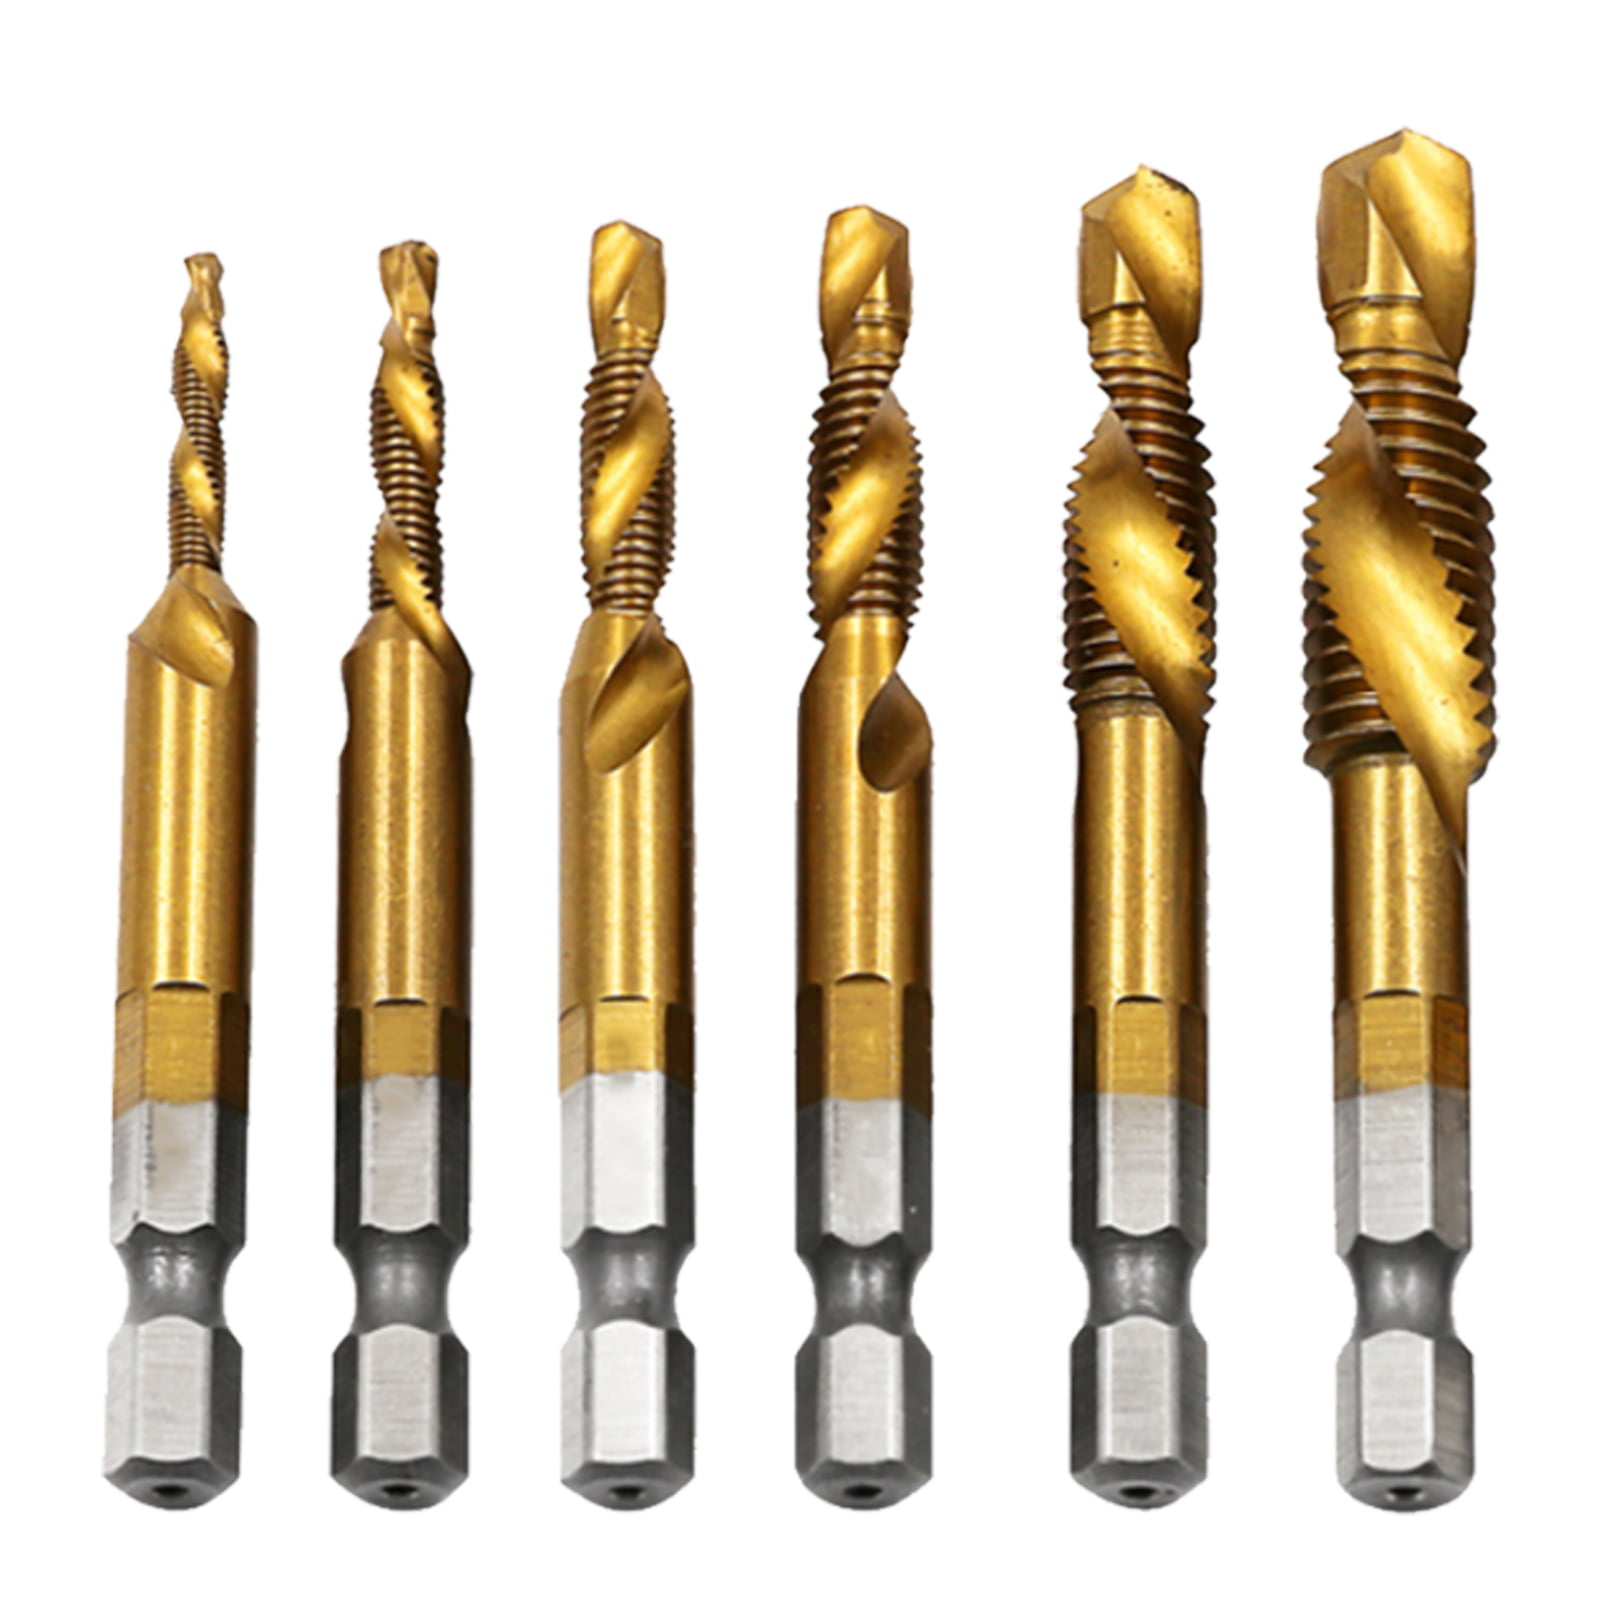 New 6pcs HSS 4341 2-in-1 Combination Drill and Tap Bit Sets Screw Tap 